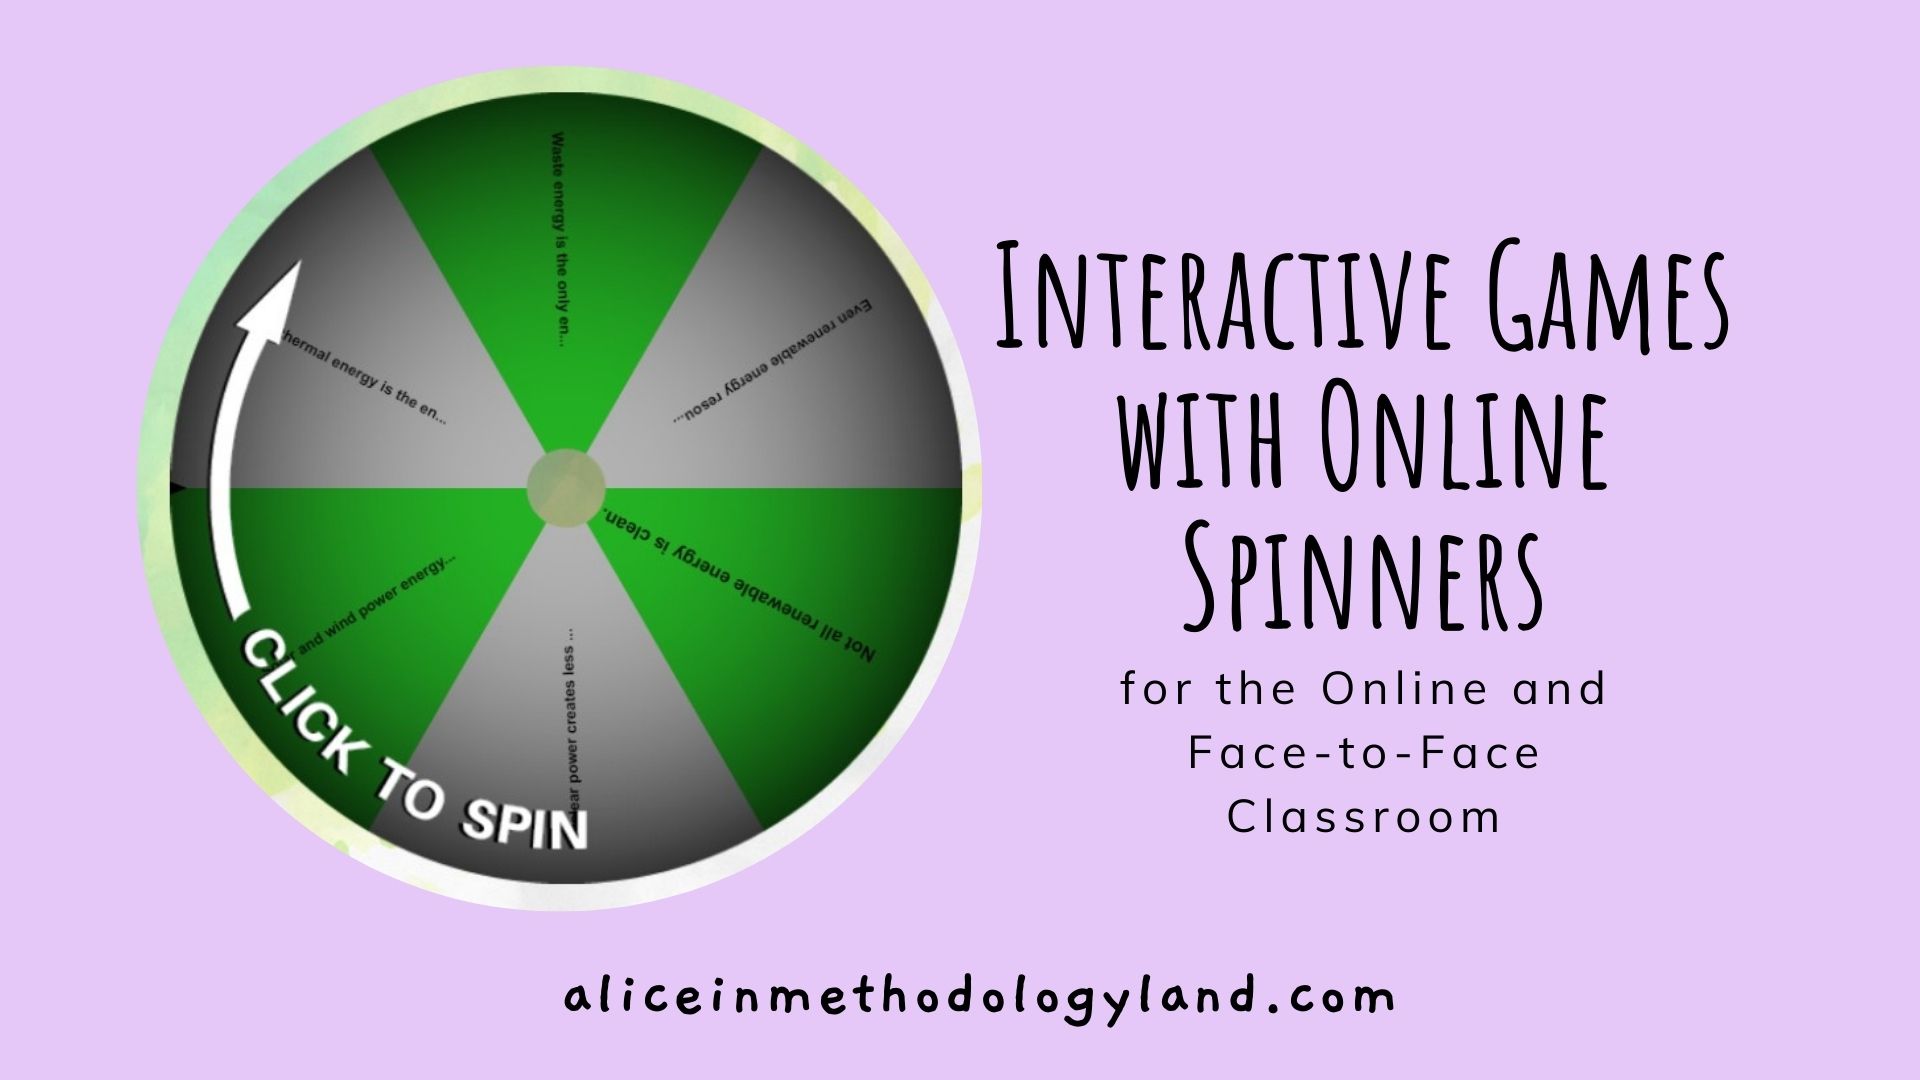 Interactive Games with Online Spinners for the Online and Face-to-Face Classroom: Spin the Wheel!